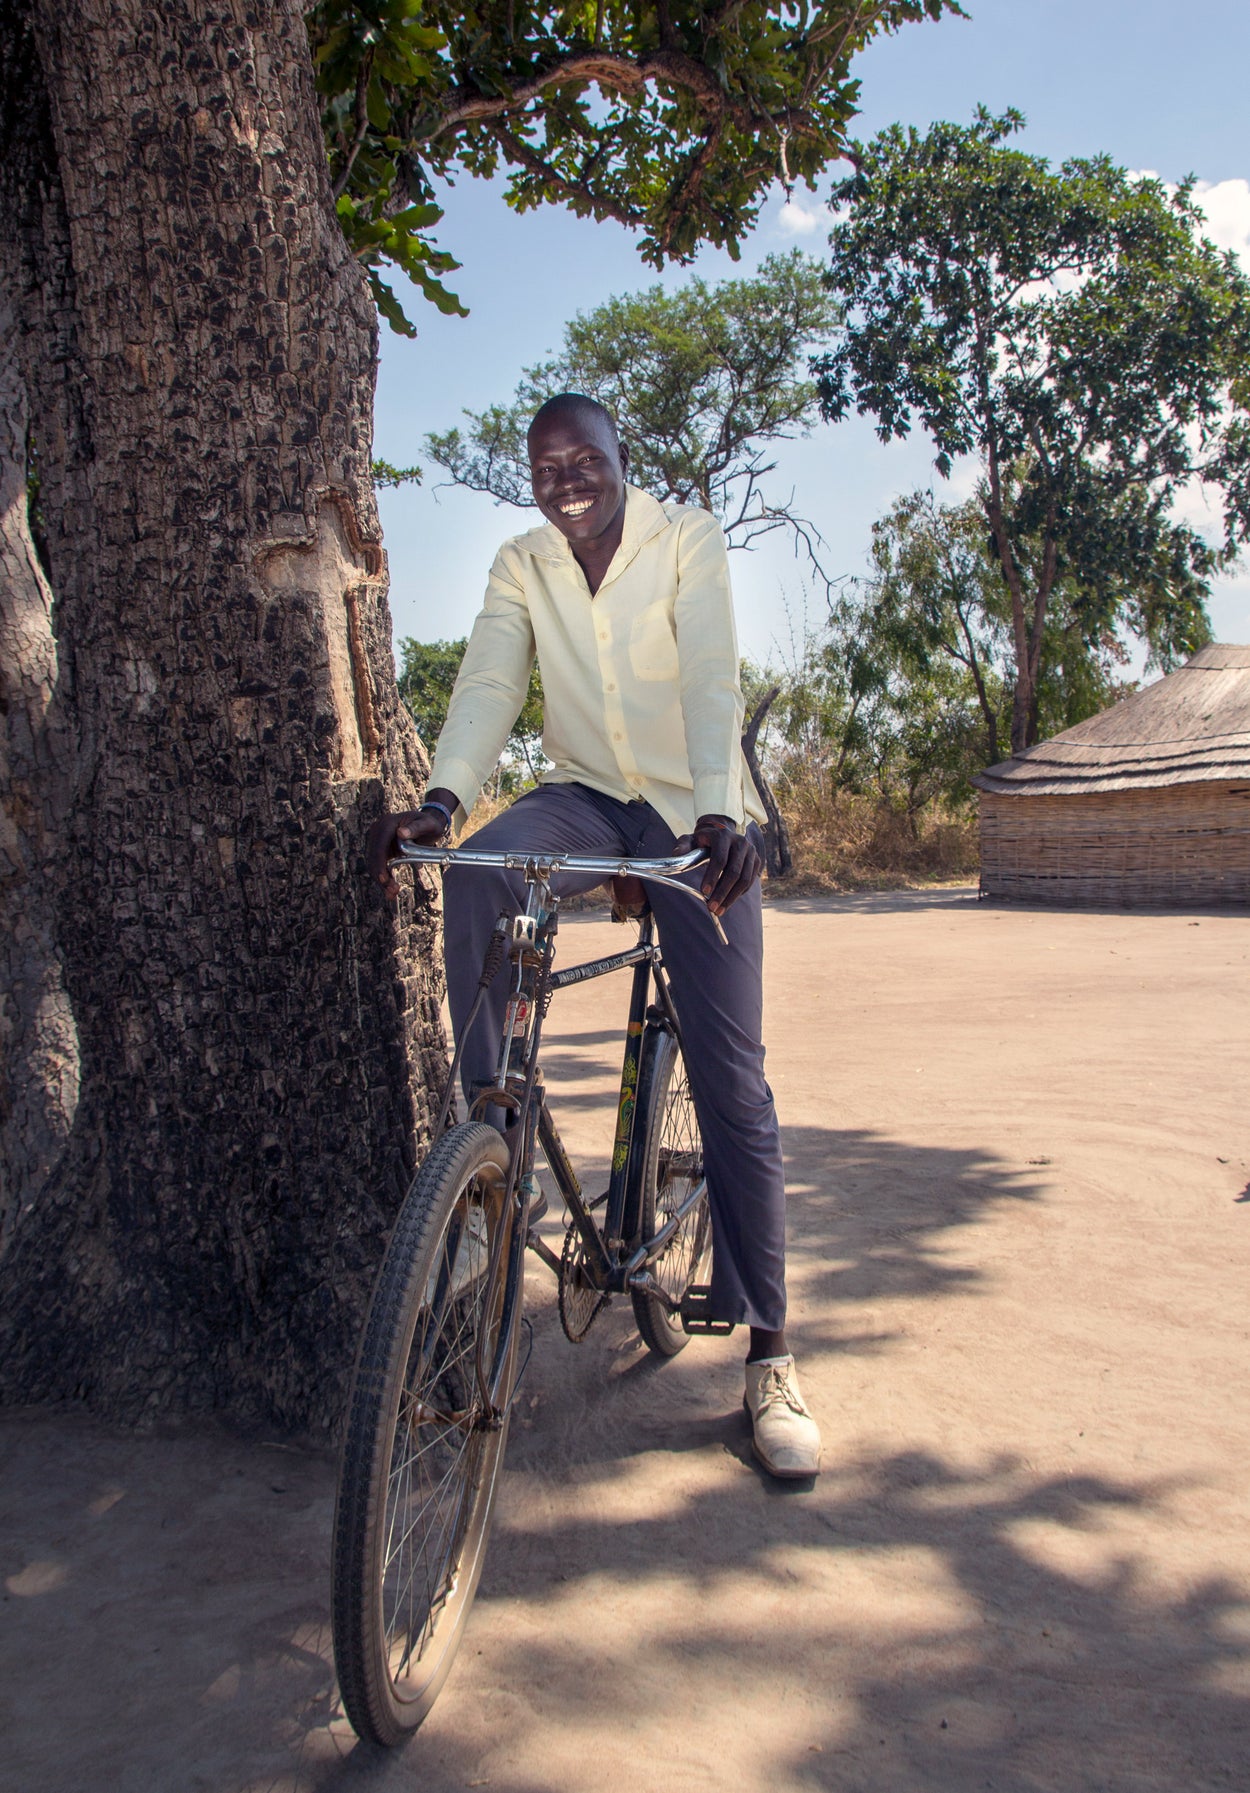 Christopher sits on his bike which allows him to go out and preach in his community.